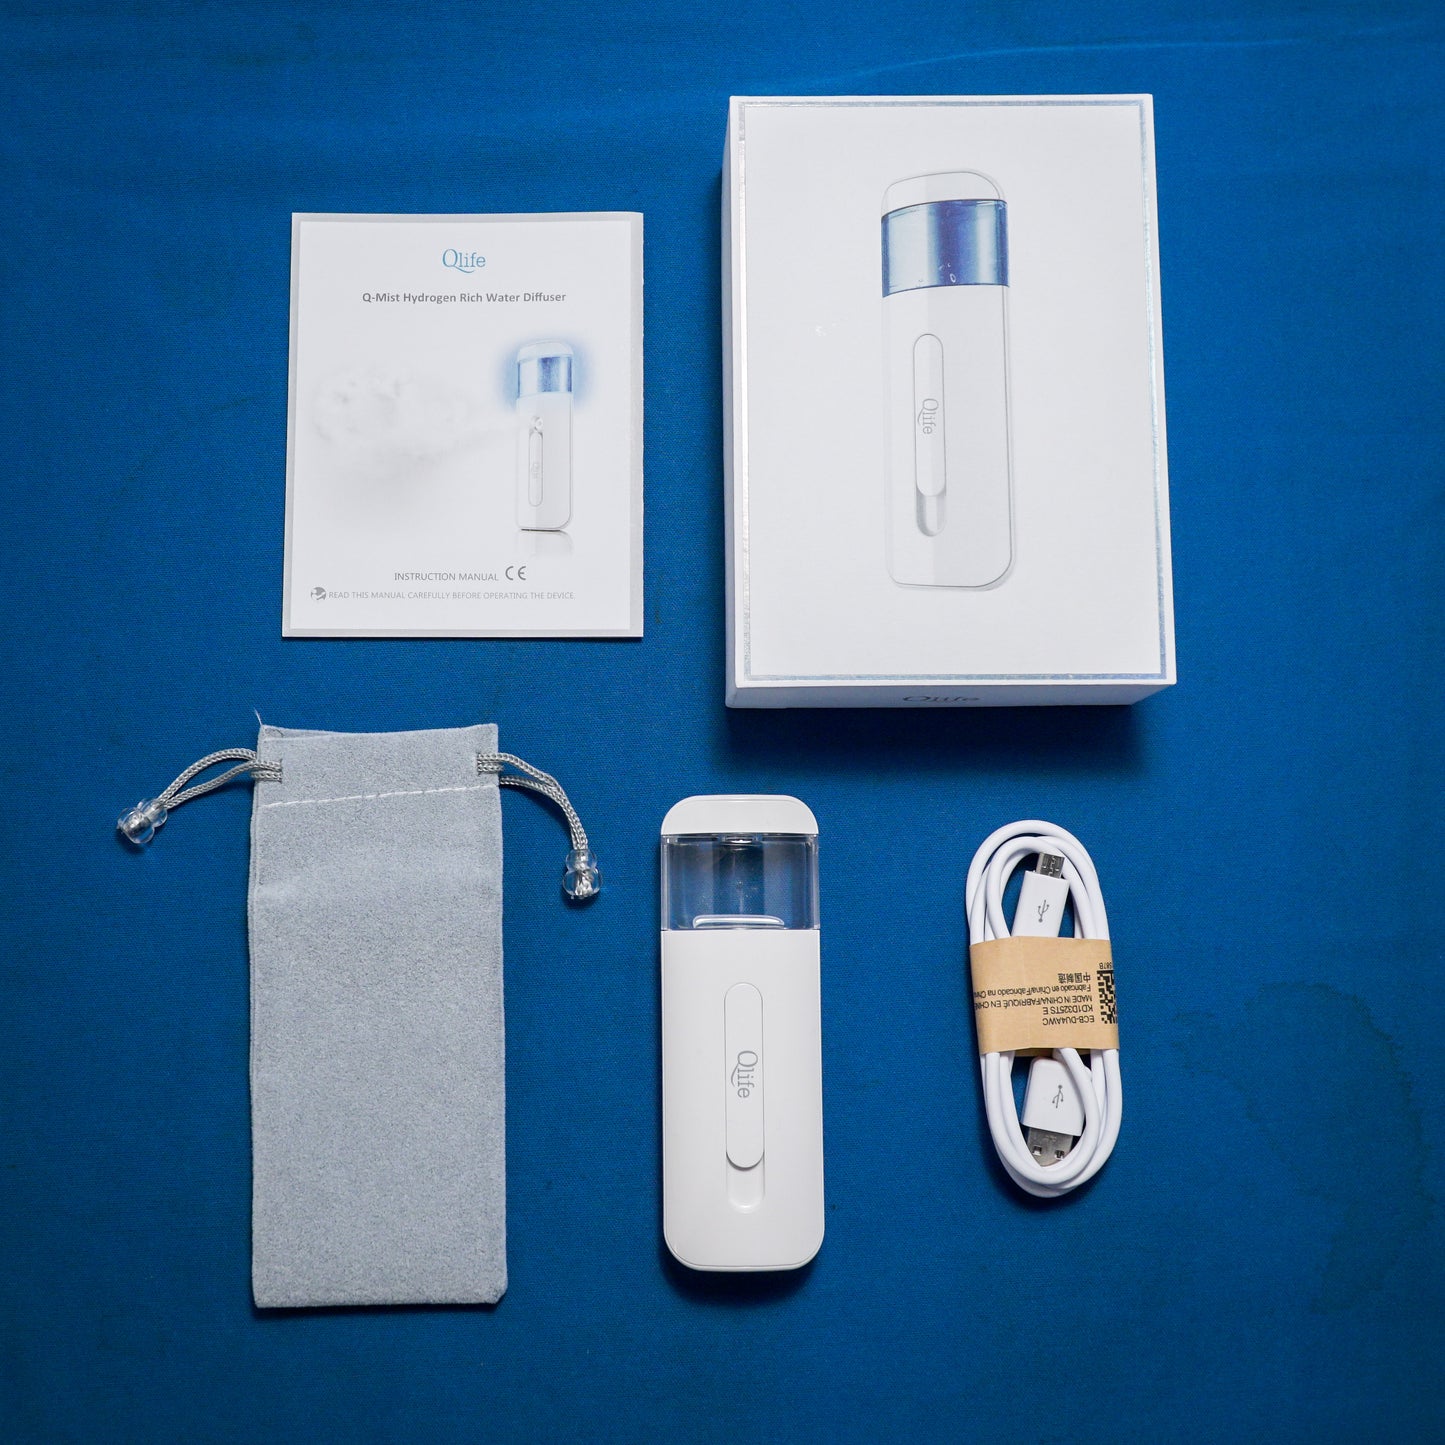 ELW-QMIST WHITE BUNDLE-25 (2 boxes of 25 ppm water and 1 x Q-Mist Hydrogen Water Diffuser Pearl White